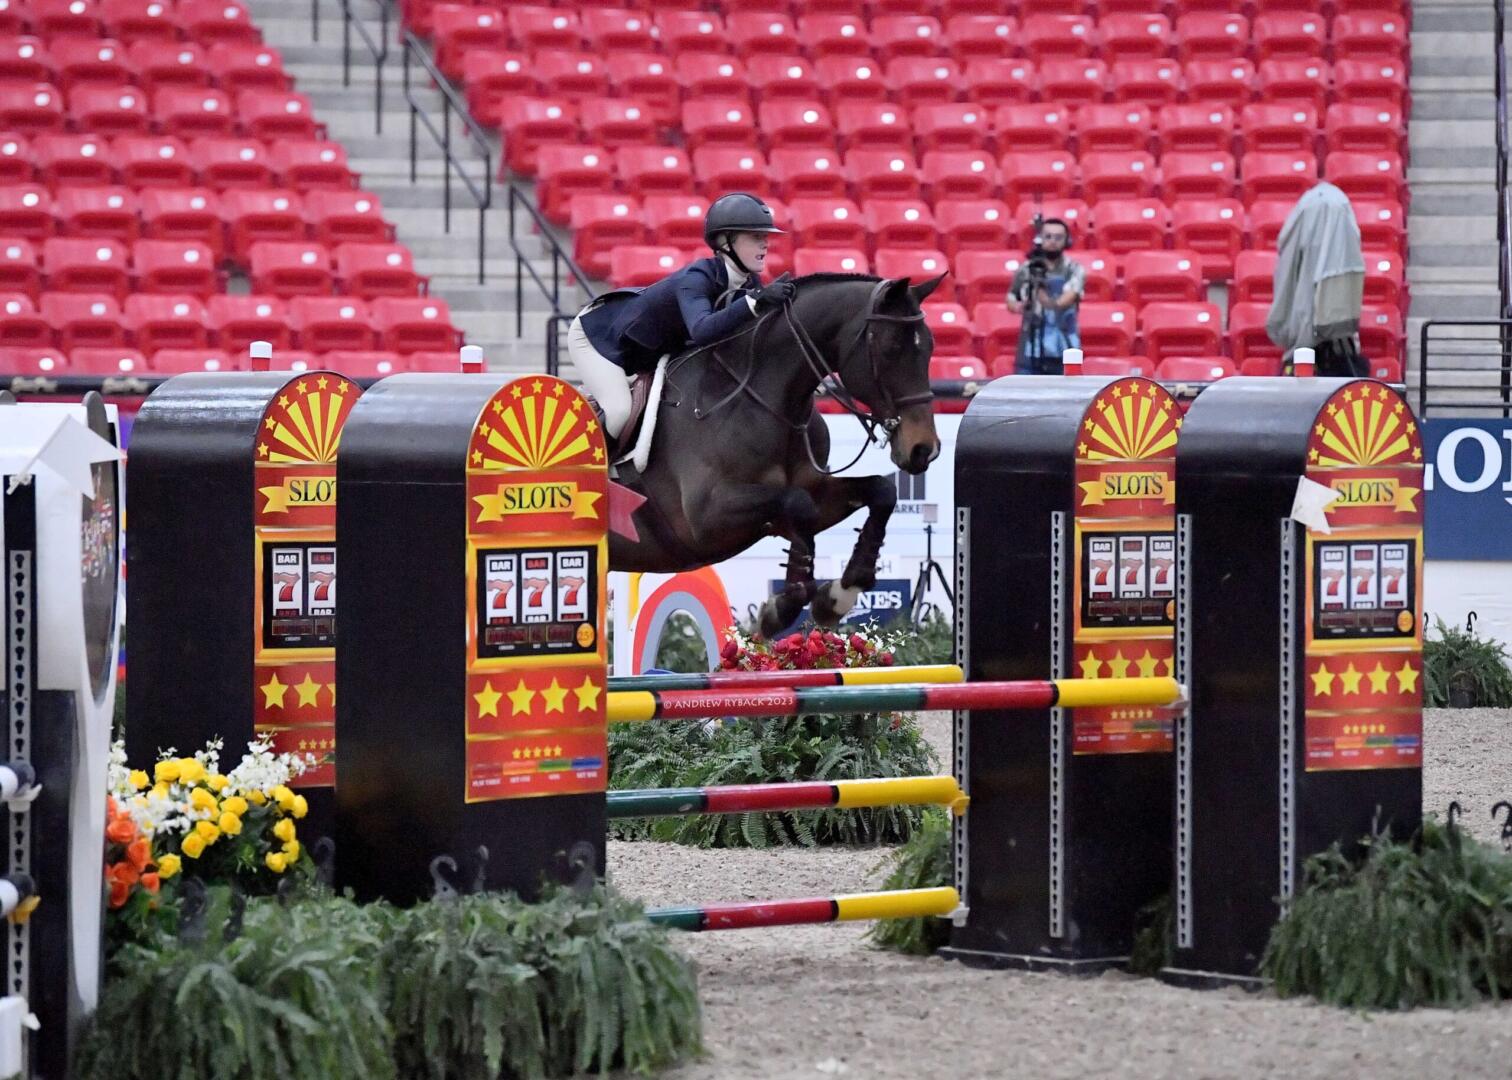 Shelby Drazan on her horses in 2014